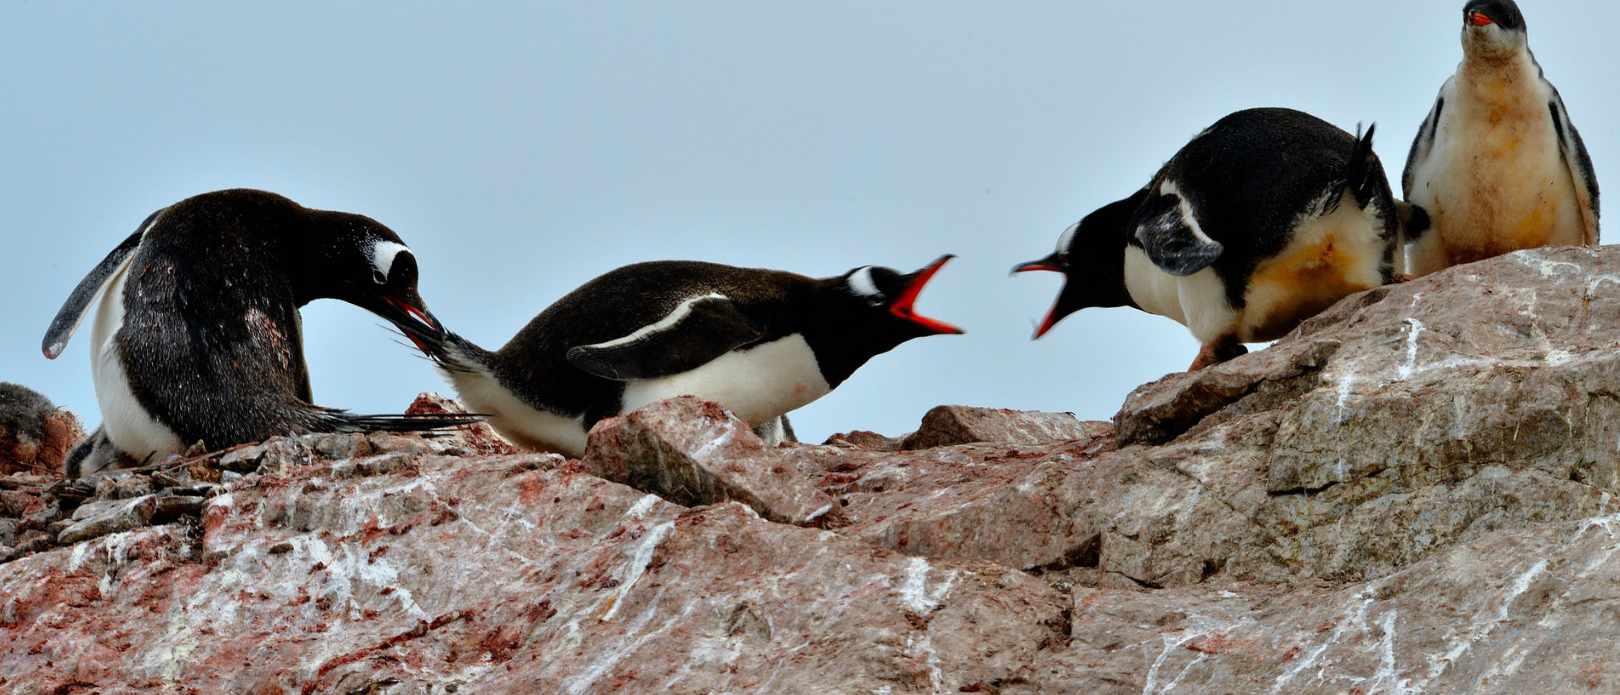 Three penguins fight on a brown rock